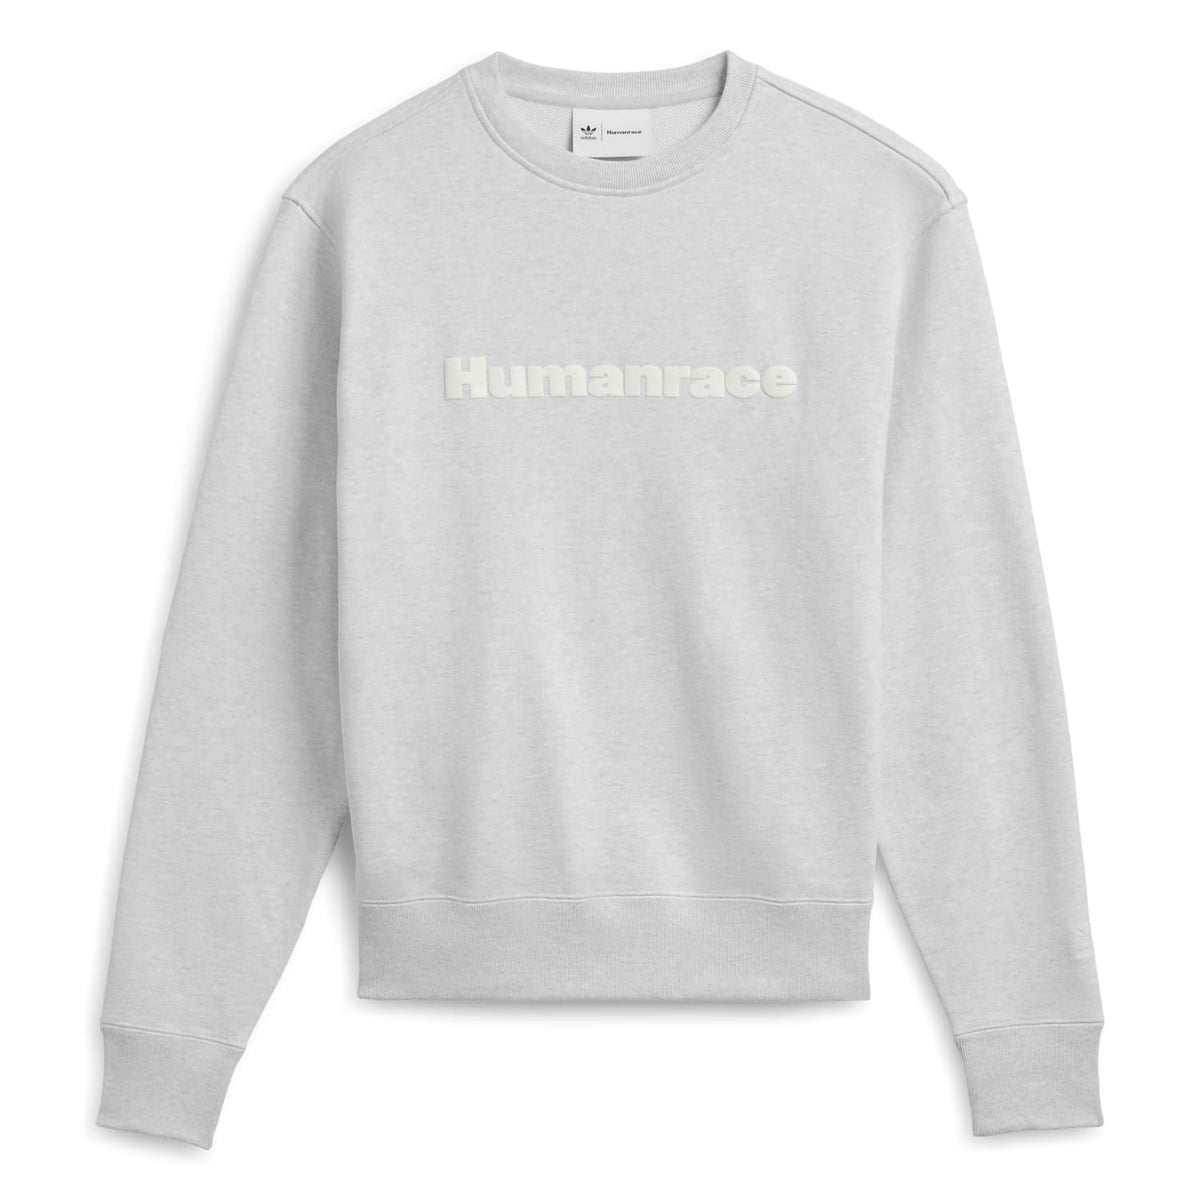 Adidas light tone of voice 2017 free - SWEATERS - Canada